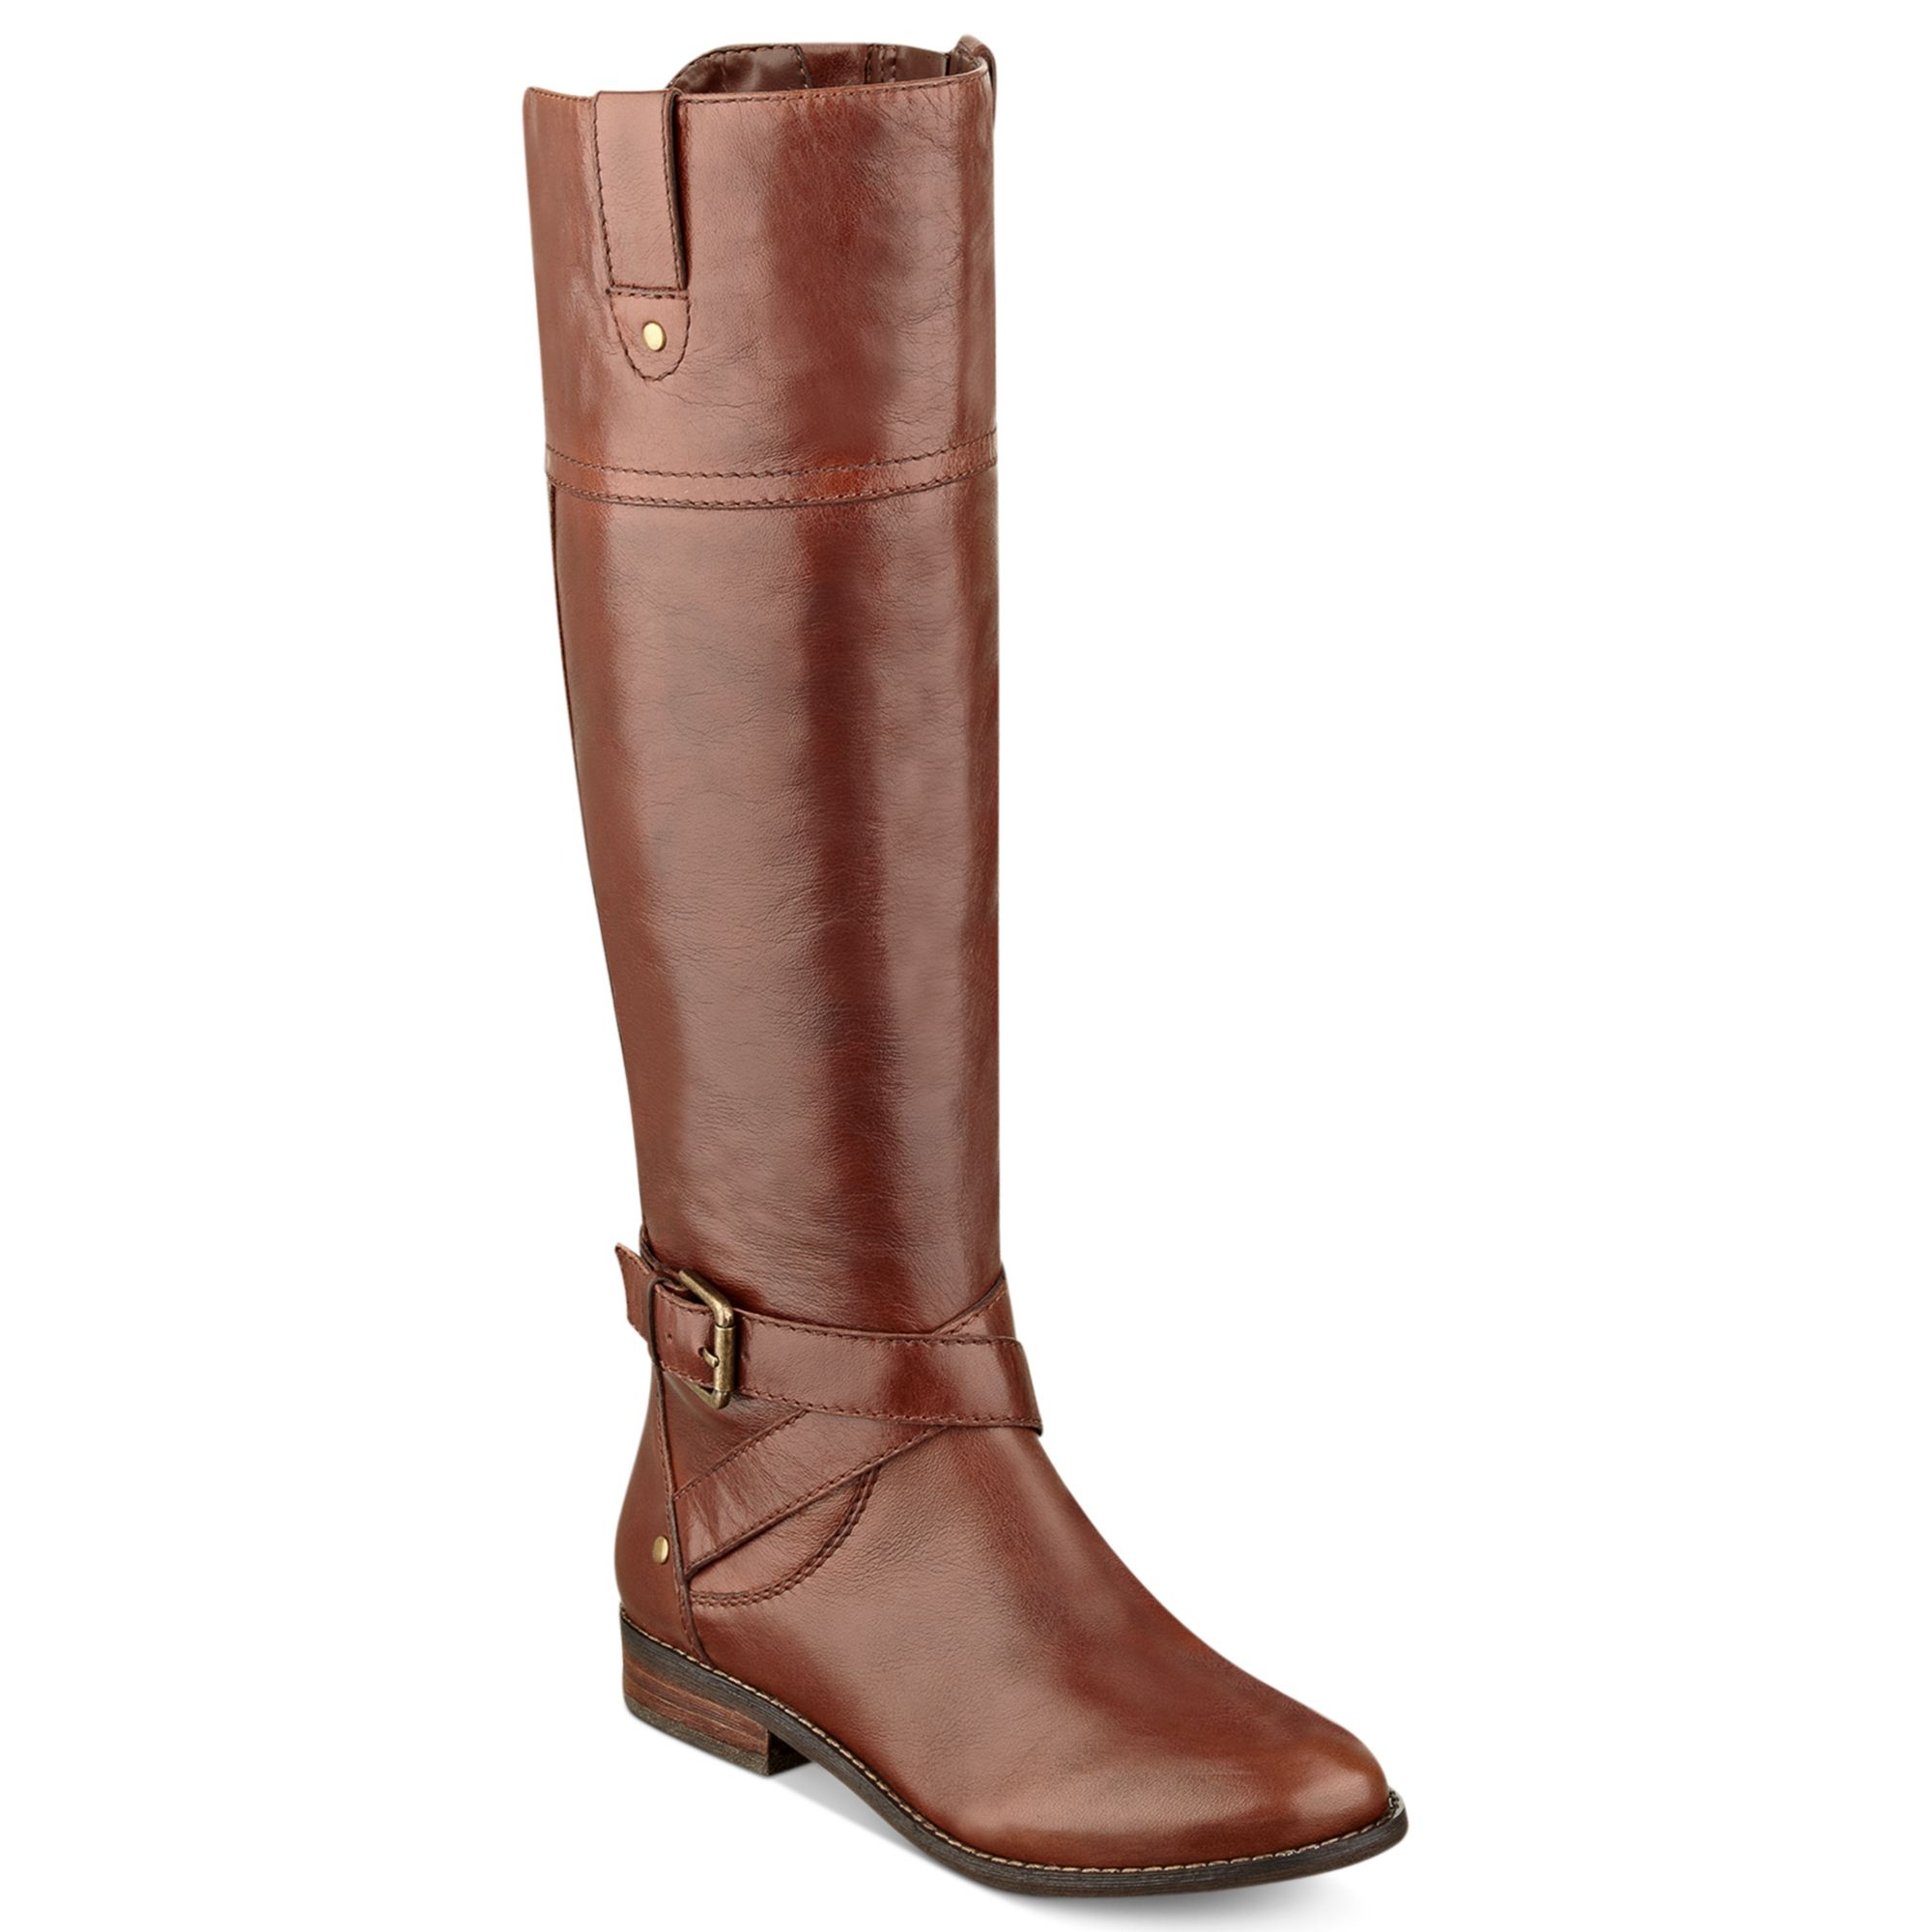 Marc fisher Amber Tall Riding Boots in Brown | Lyst